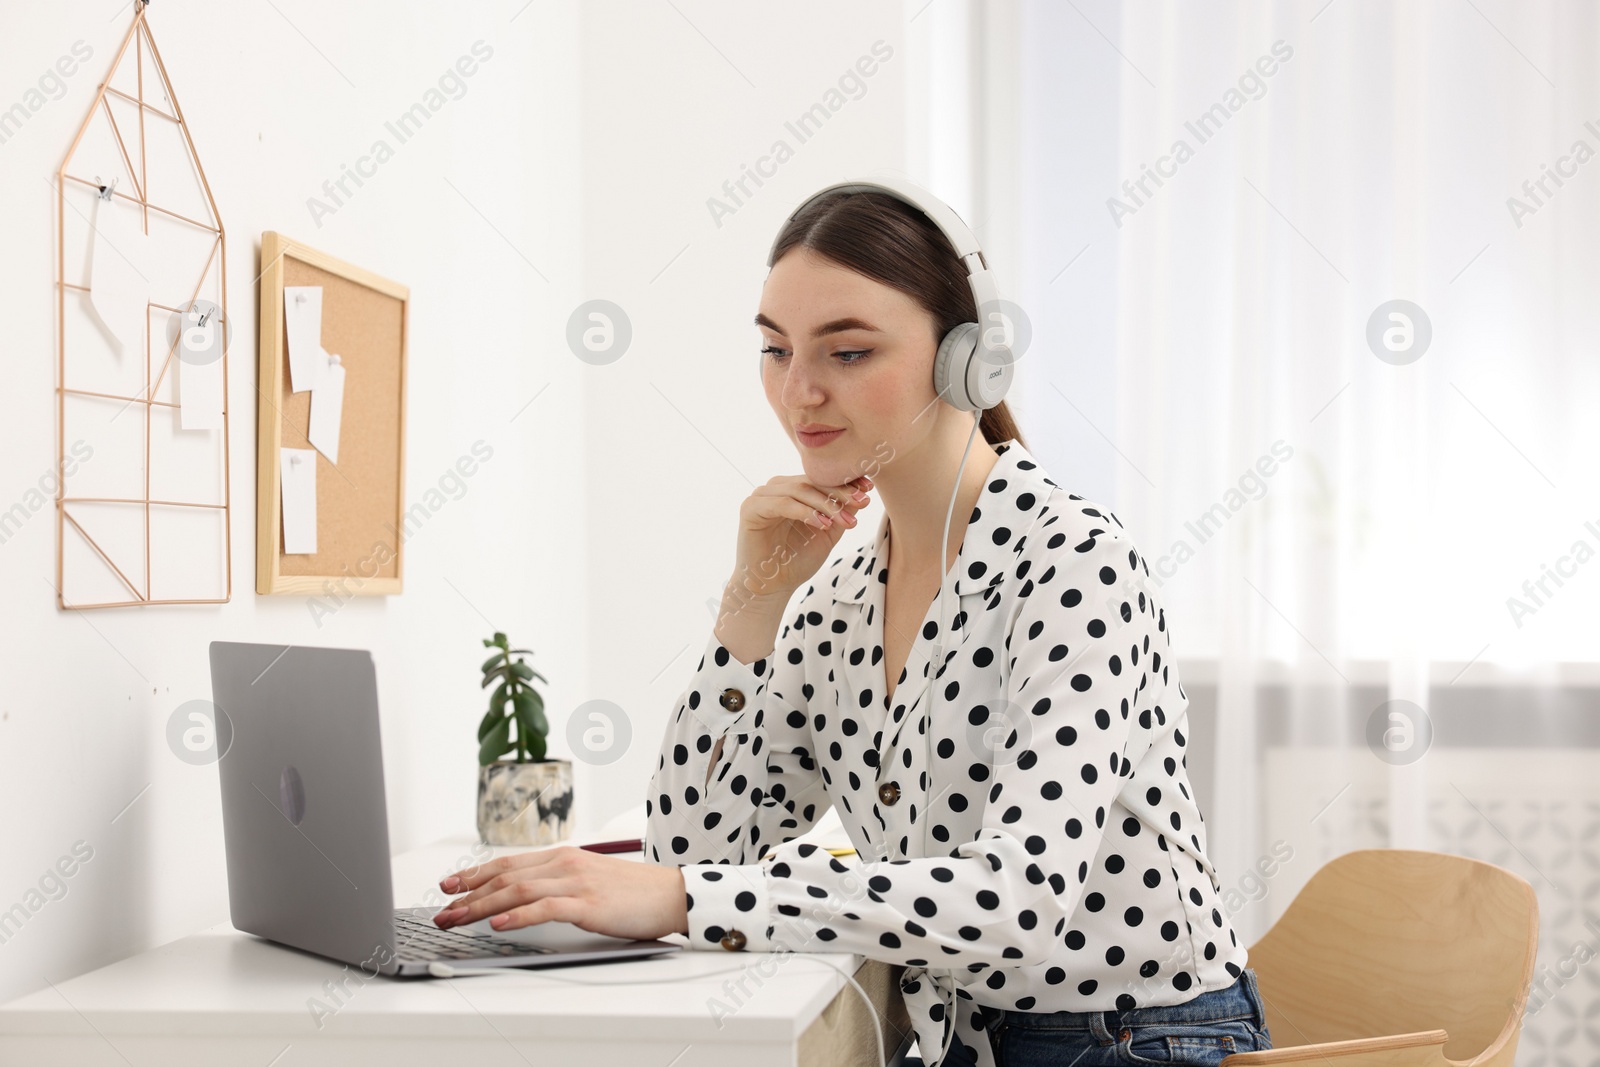 Photo of E-learning. Young woman using laptop during online lesson at table indoors